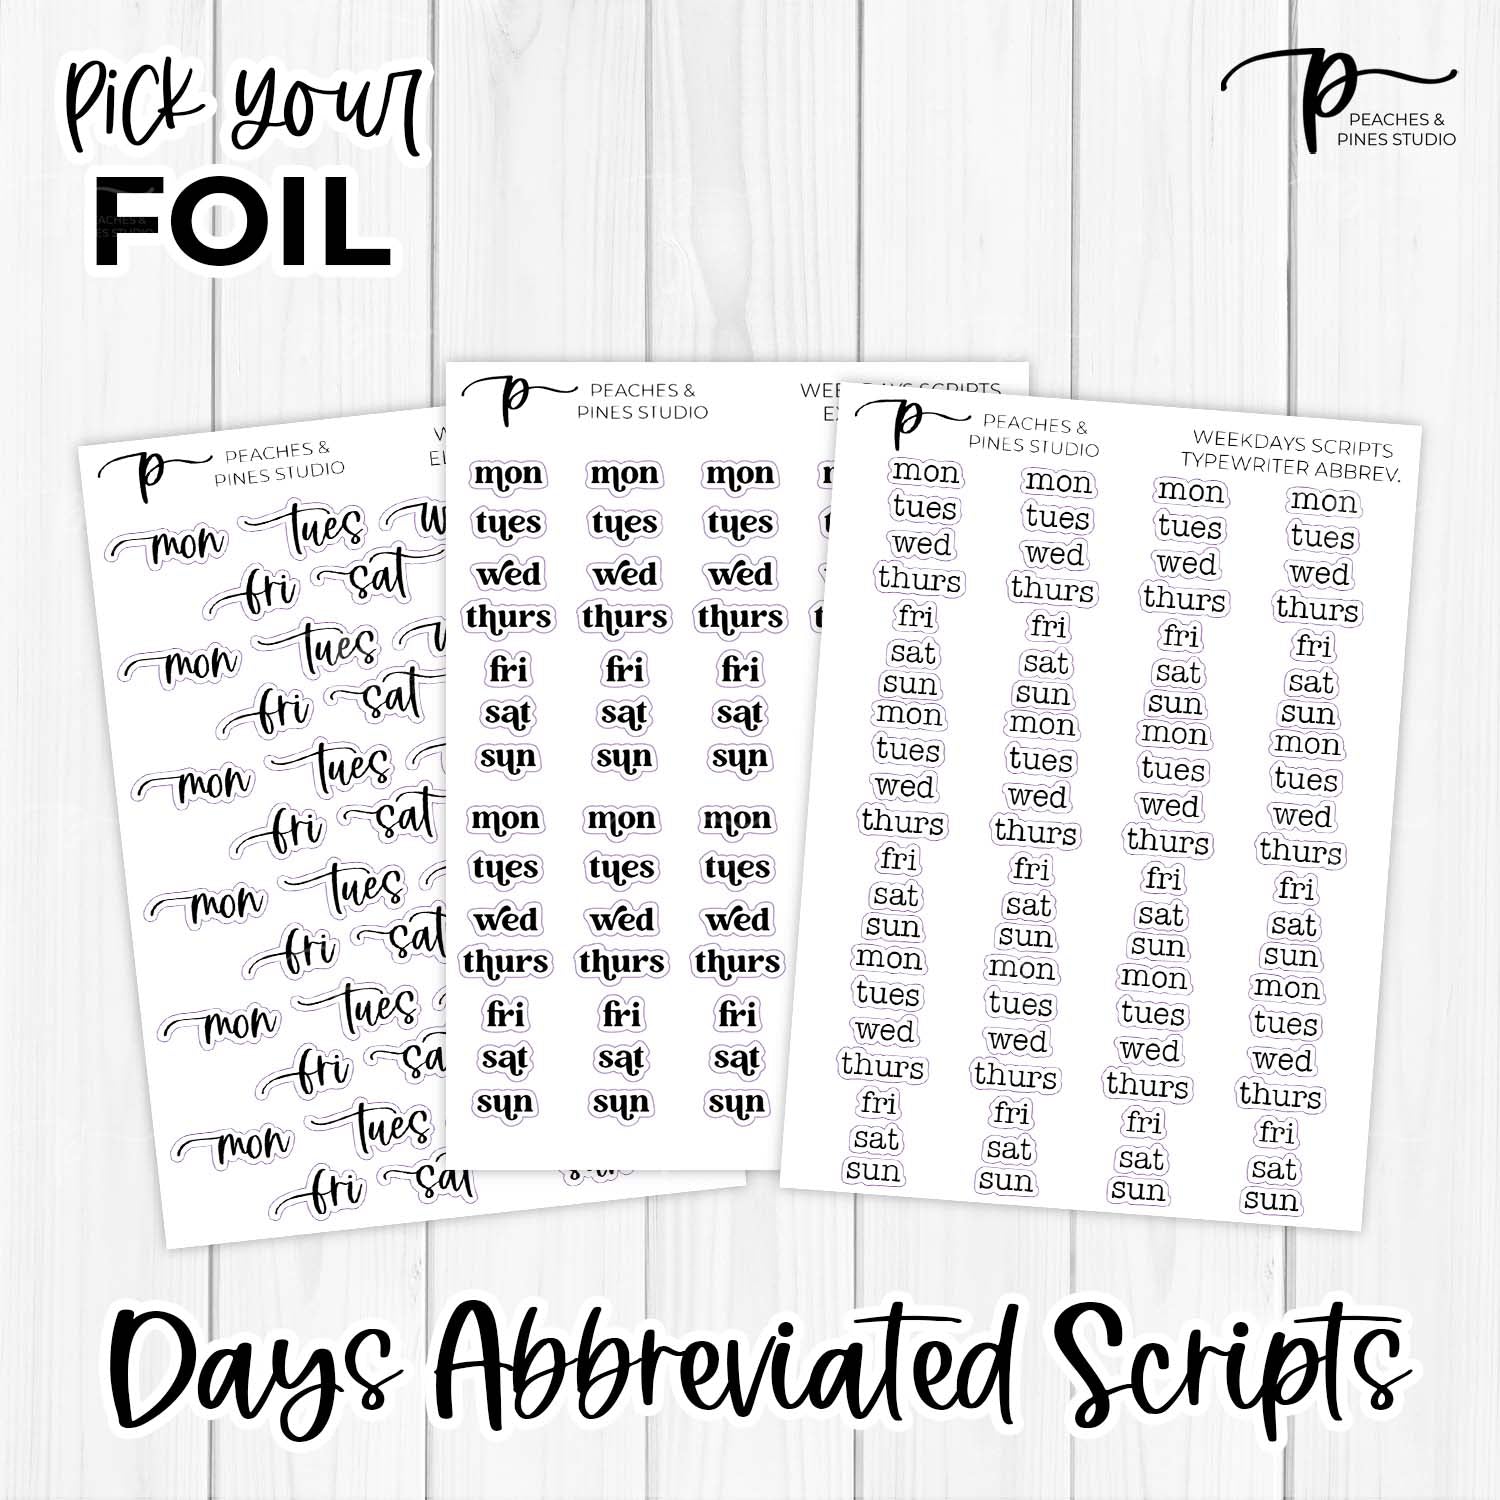 Weekdays Abbreviated - Foiled Scripts